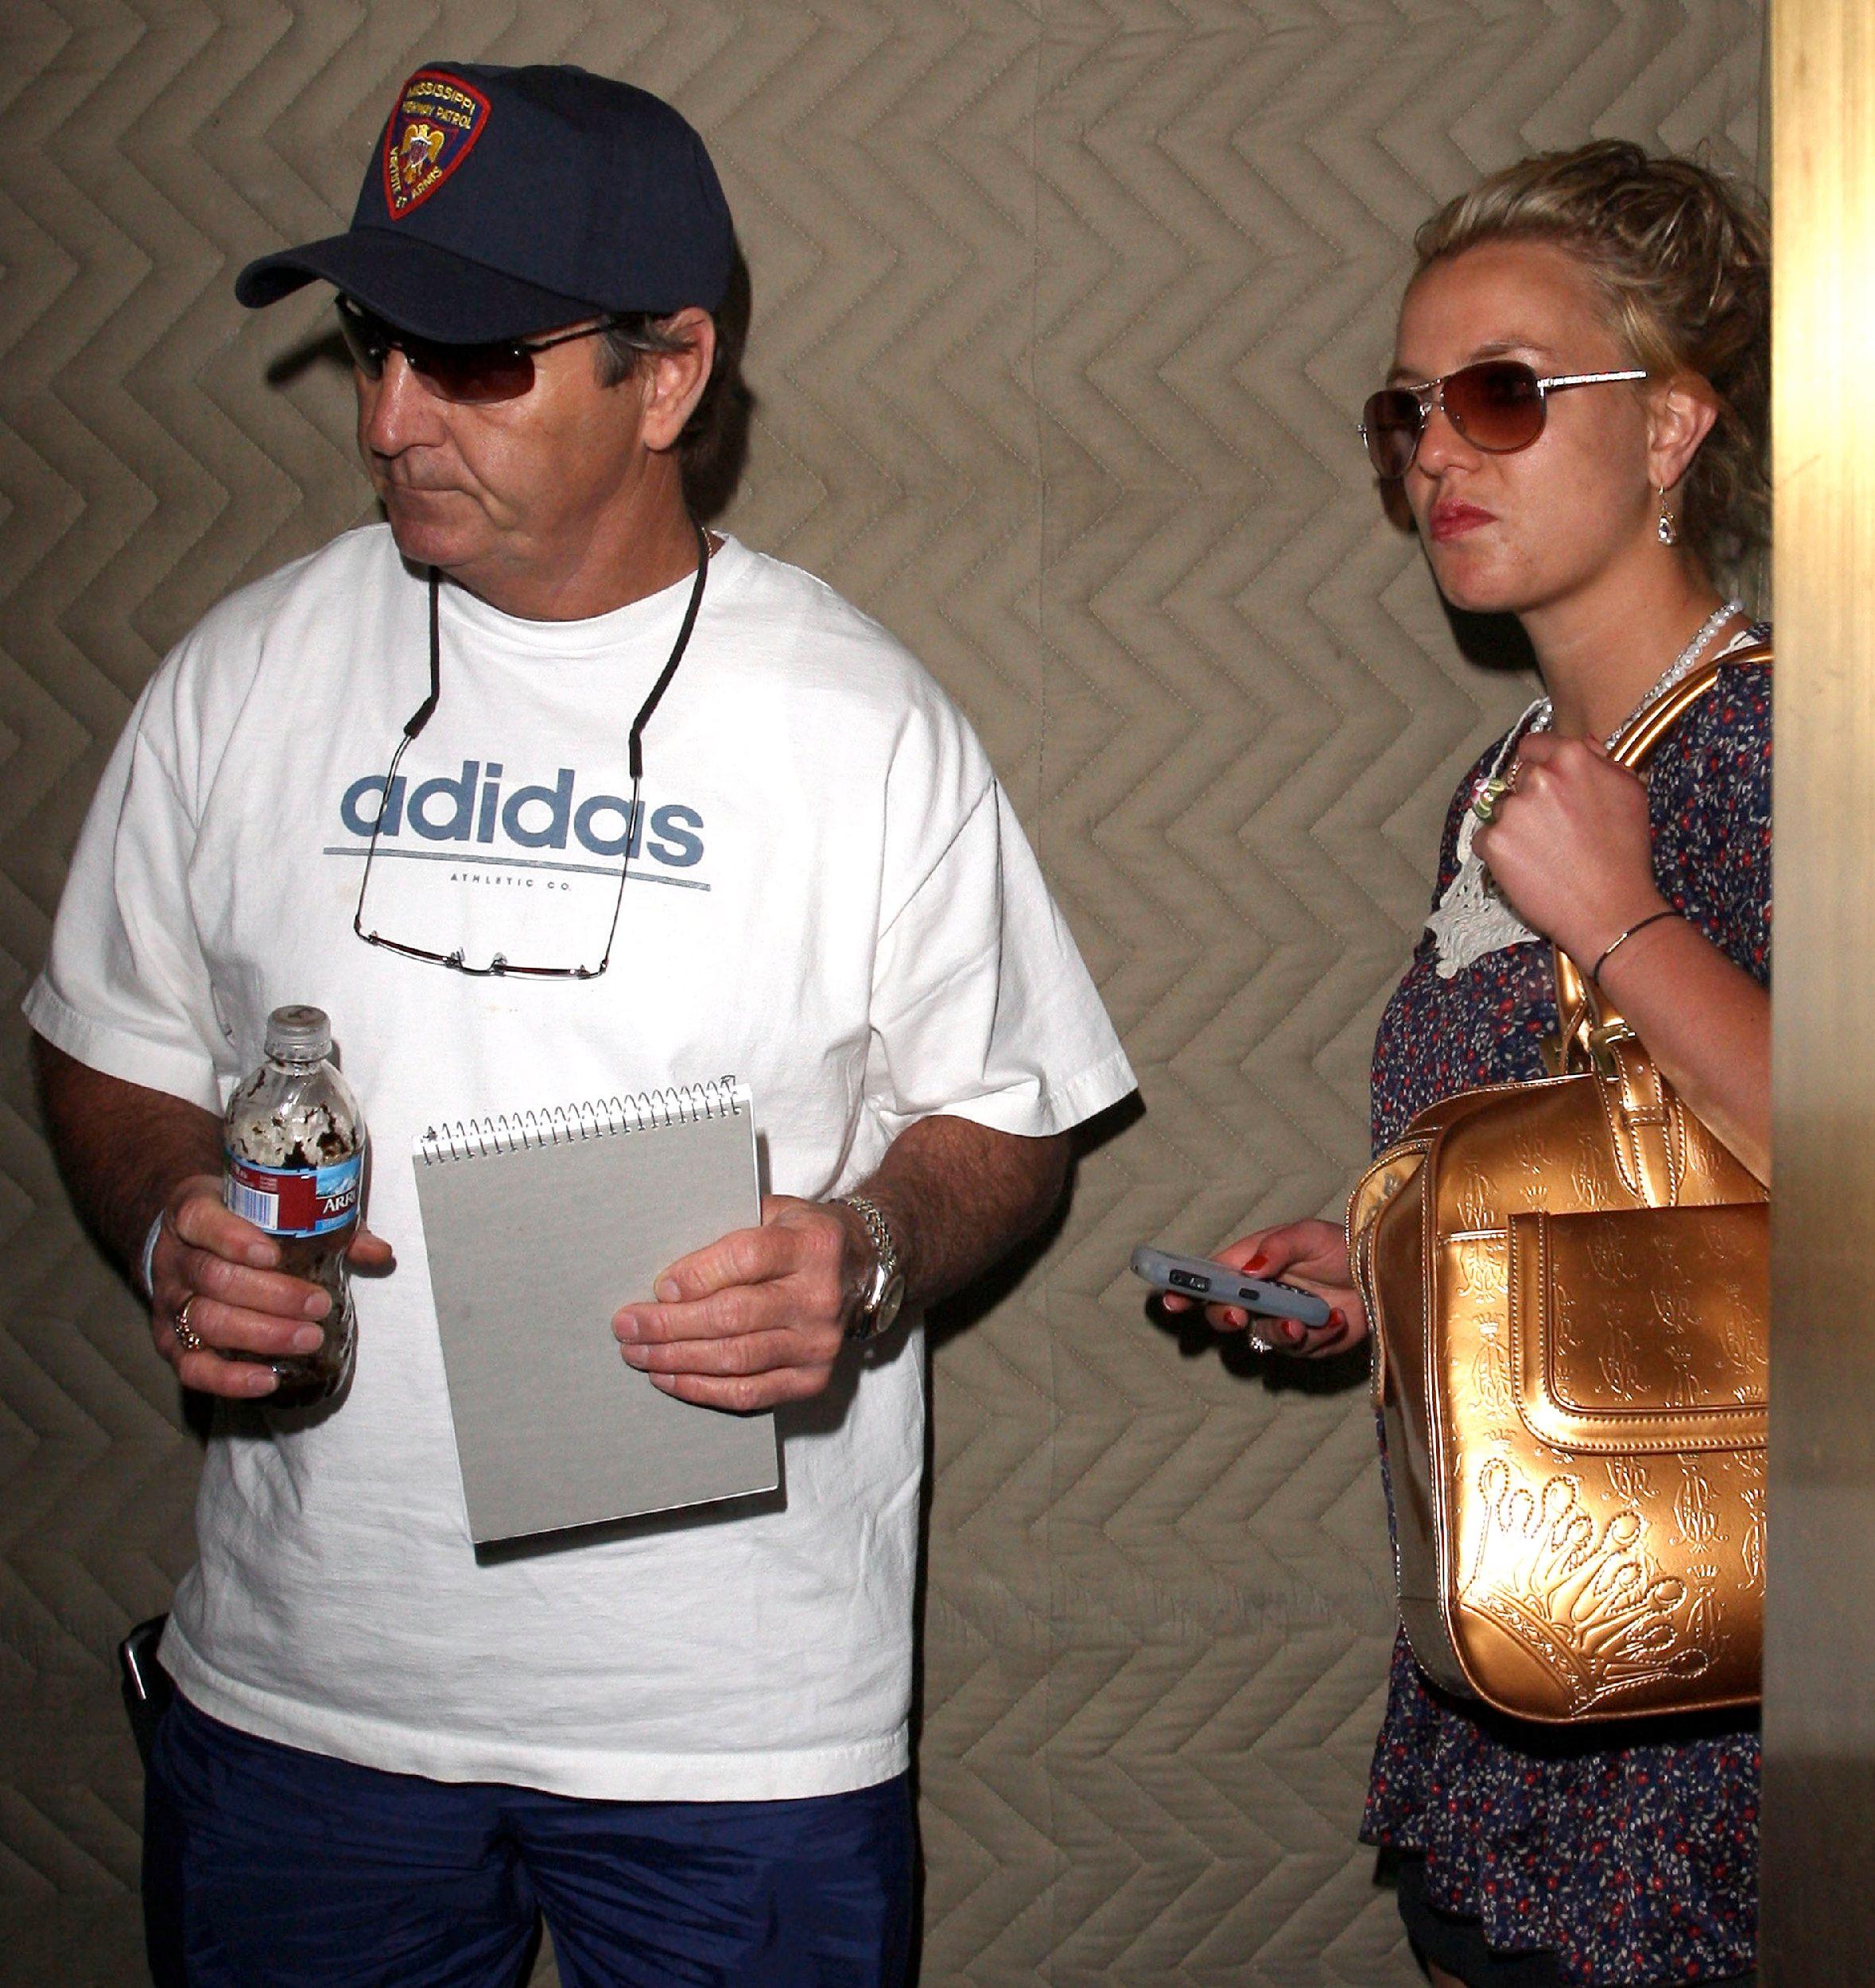 Britney Spears’ Father Says Her Mental Illness Was A ‘Daily Worry’